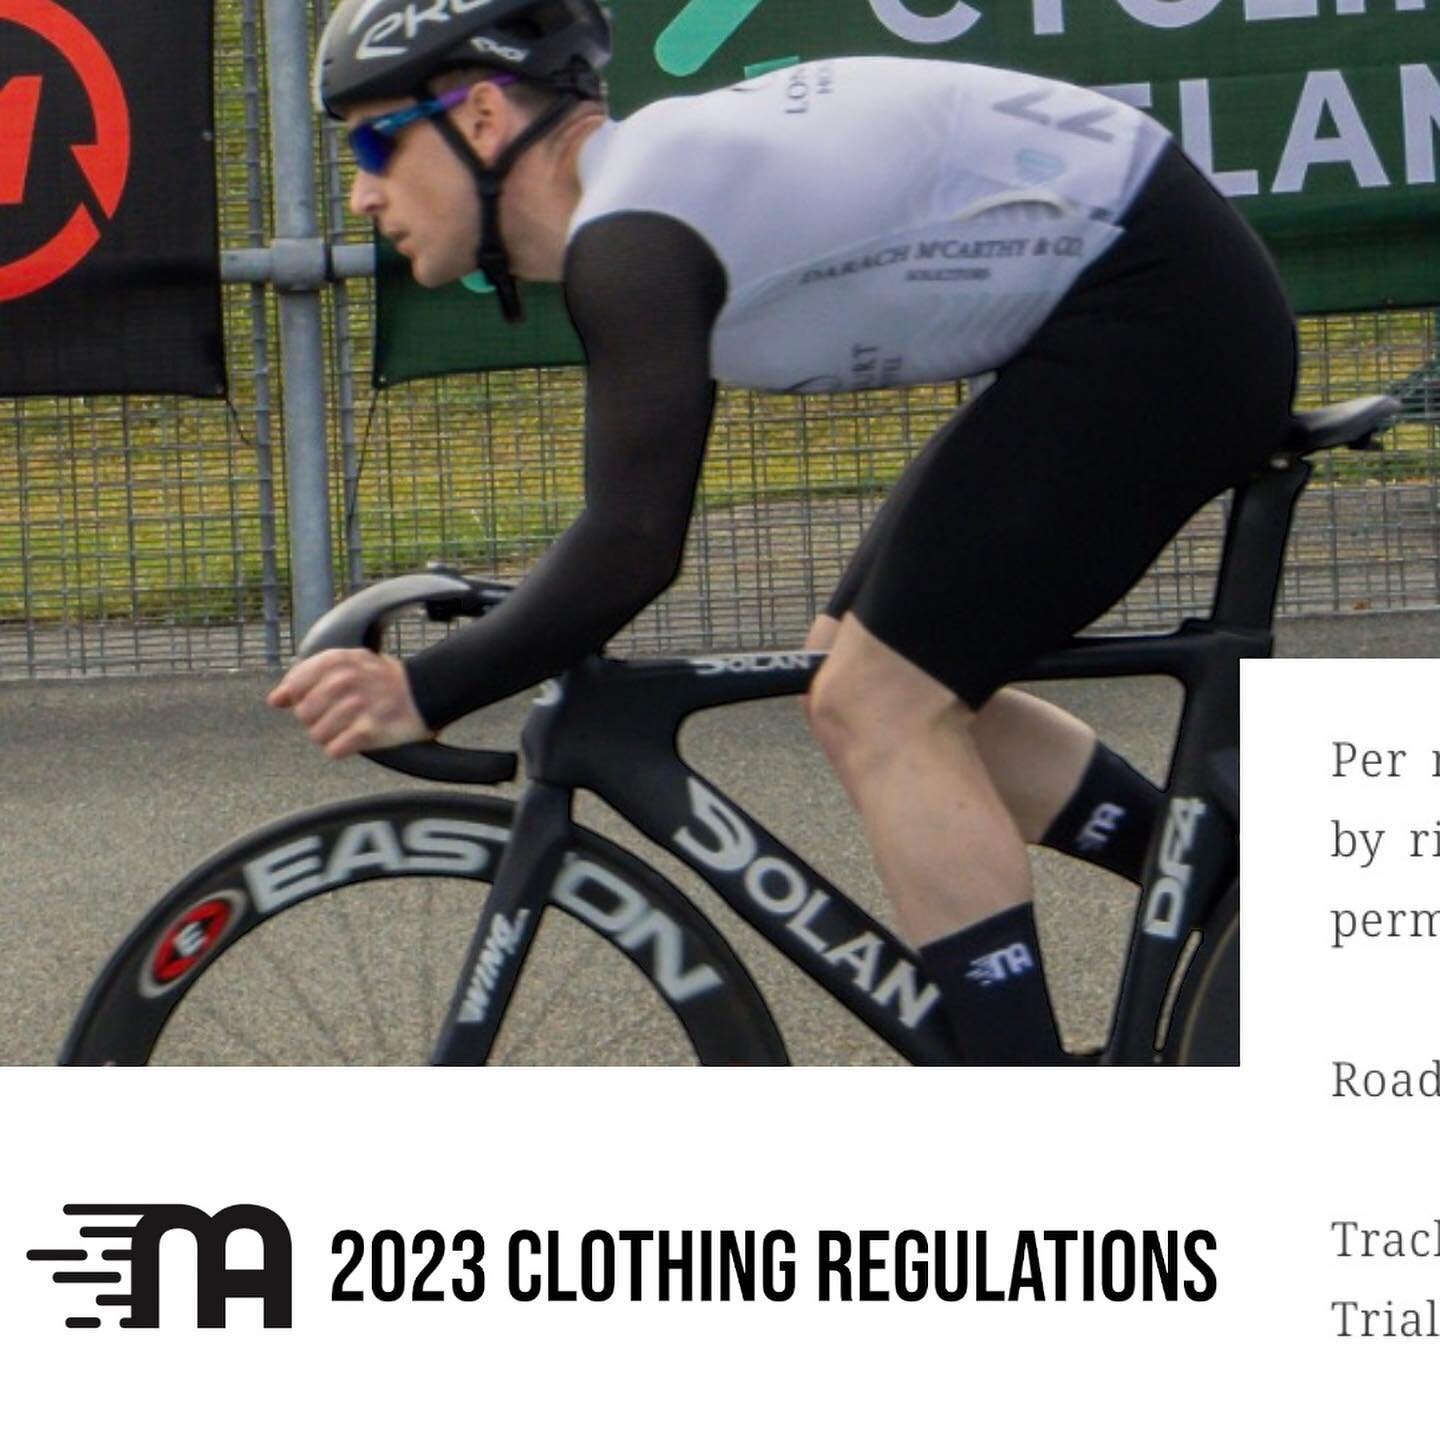 Are you aware of the new 2023 clothing regulations?

Under Cycling Ireland and UCI rules, number pockets are only allowed for timed events. 

What does that mean for our clothing?

-We will continue to produce our time trial suits with single number 